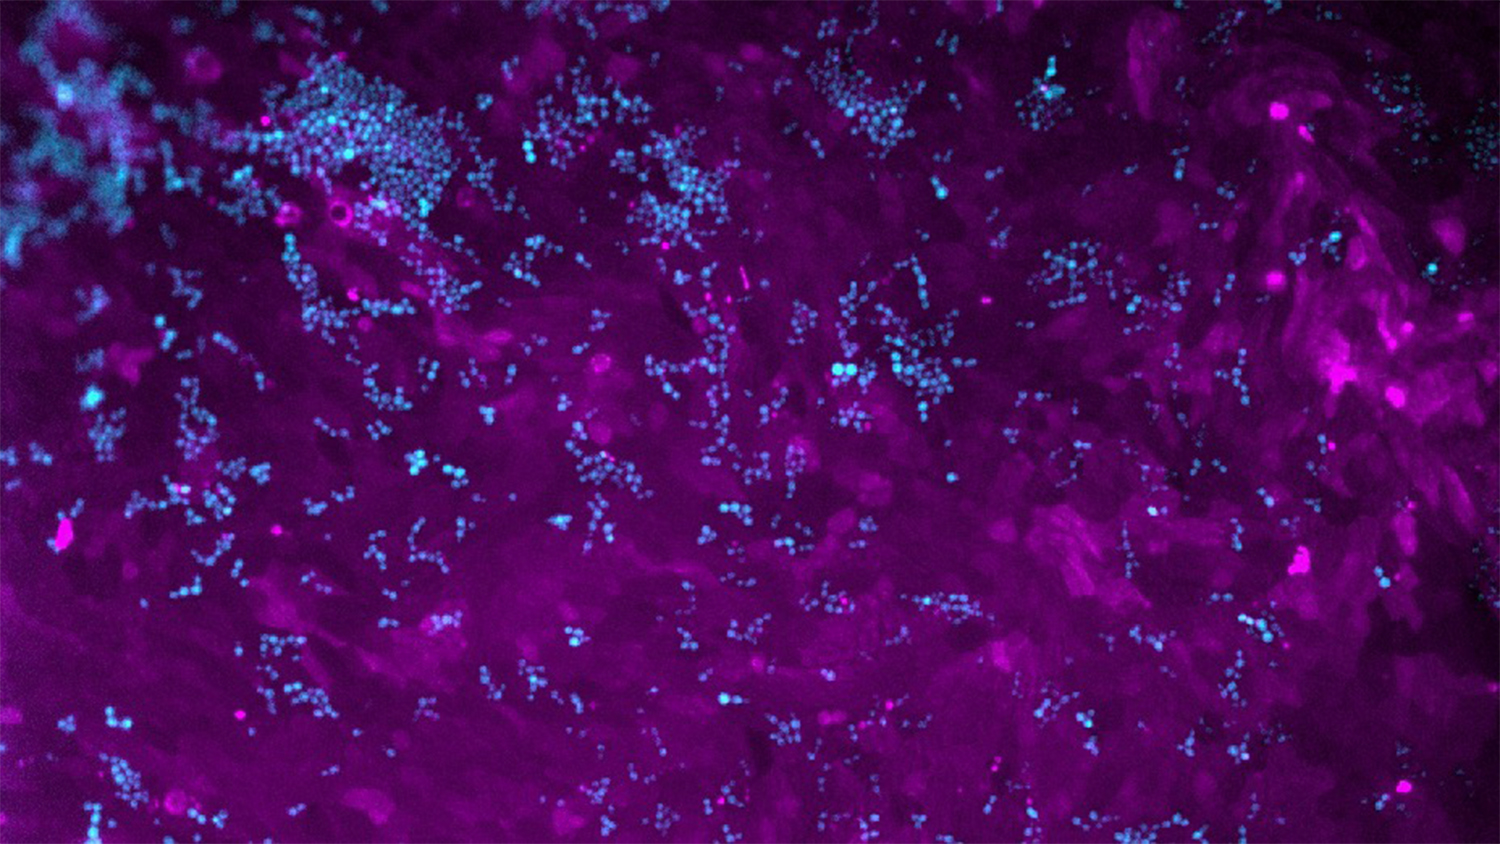 Yeast growing alongside human intestinal cells. Probiotic yeast (S. boulardii) are stained in blue, and primary human colon cells are stained in purple.